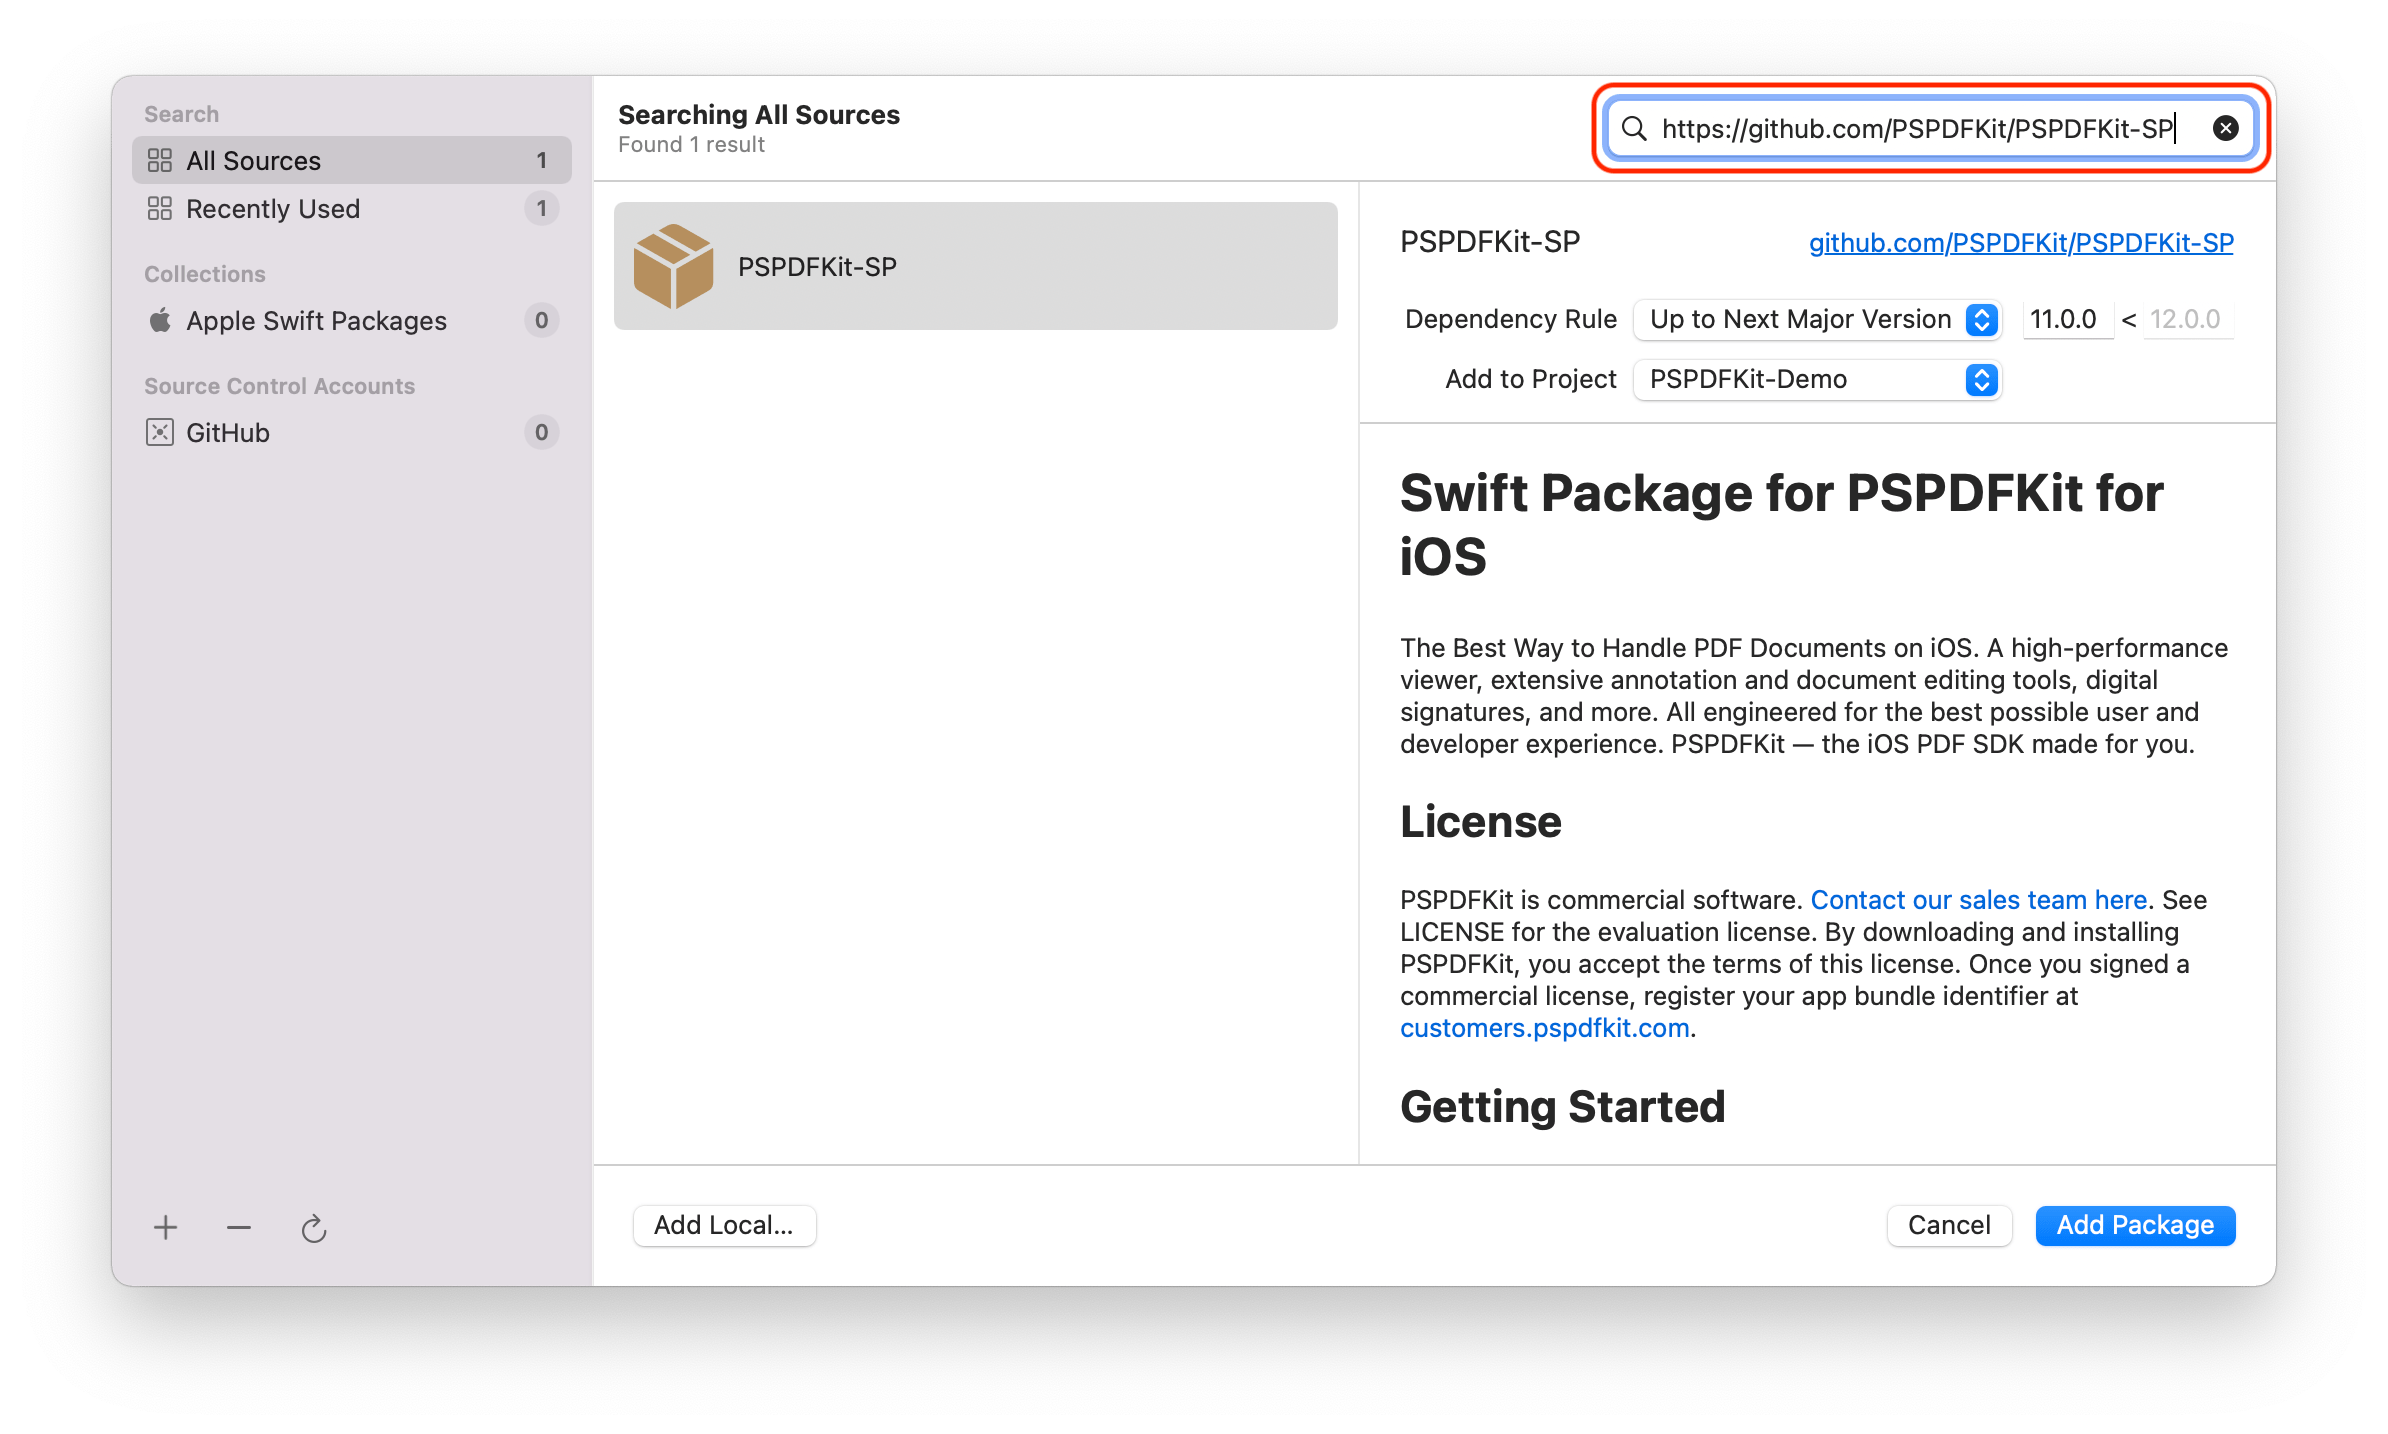 Adding the package URL